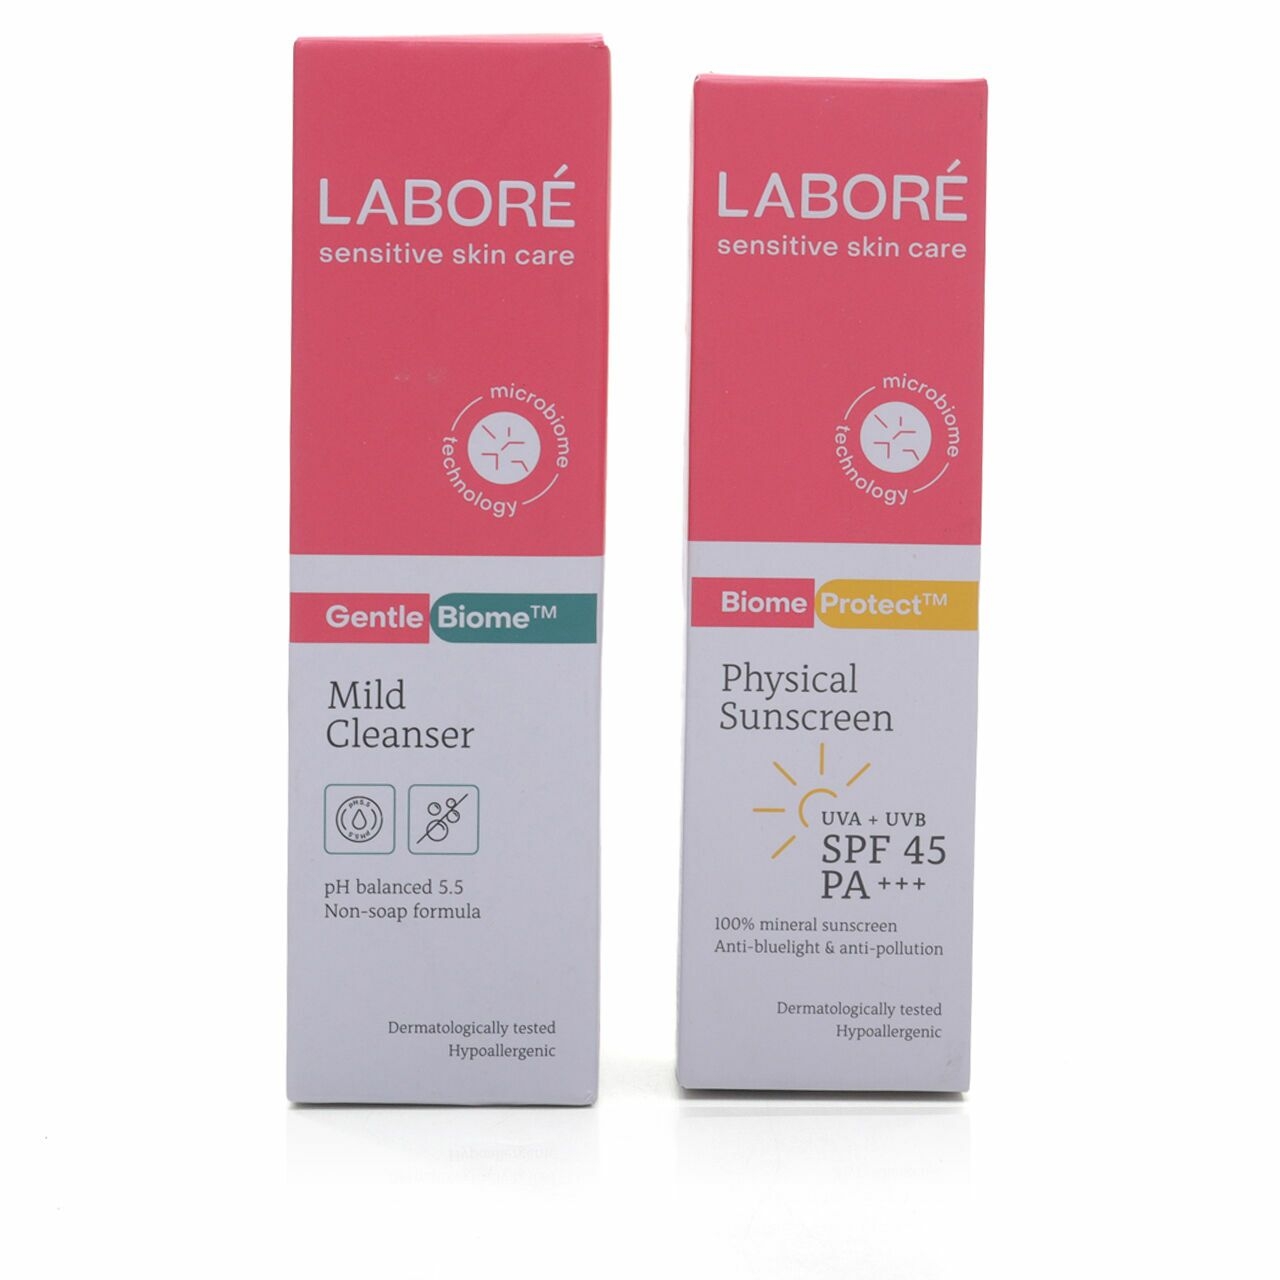 Private Collection Bundling Labore Sensitive Physical Sunscreen&Mild Cleanser Skin Care